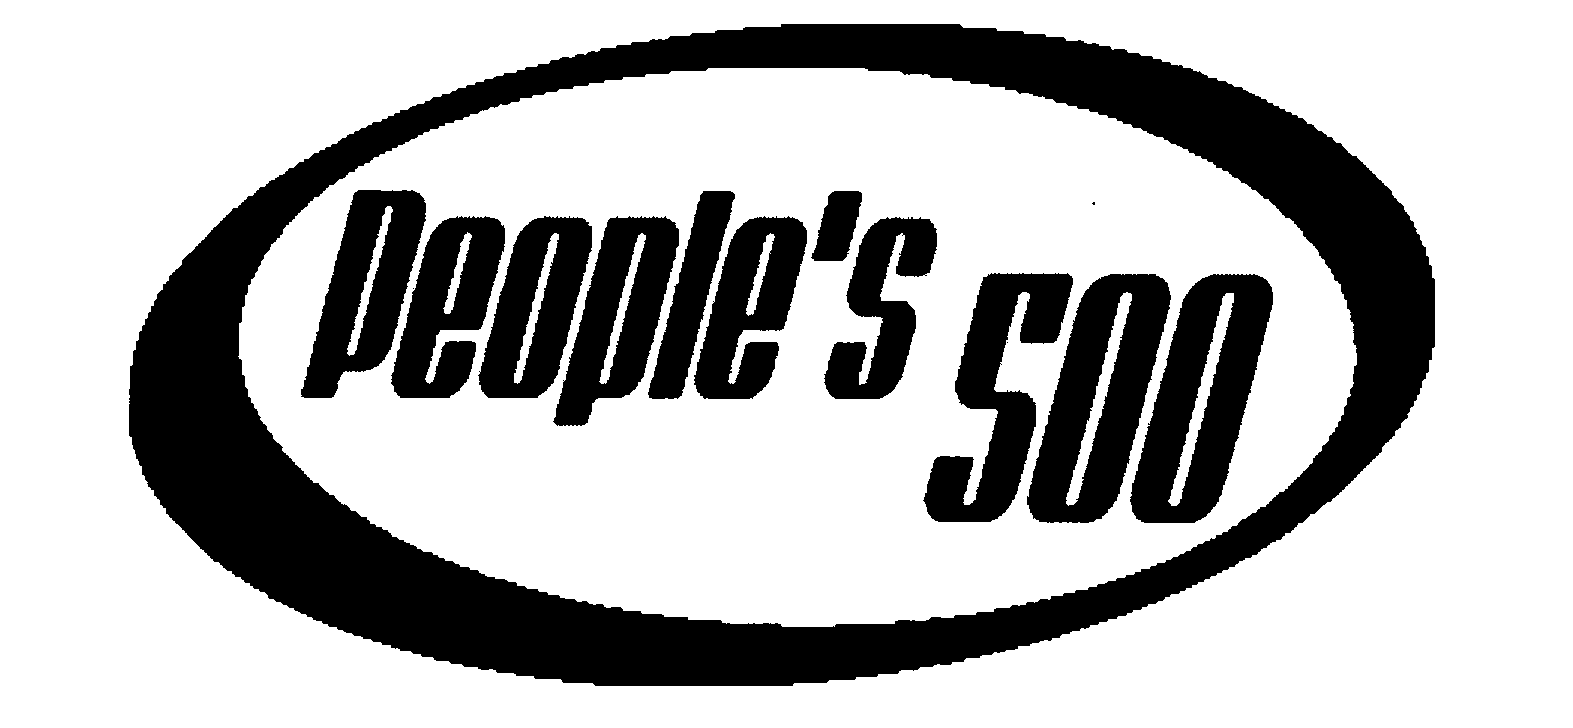  PEOPLE'S 500